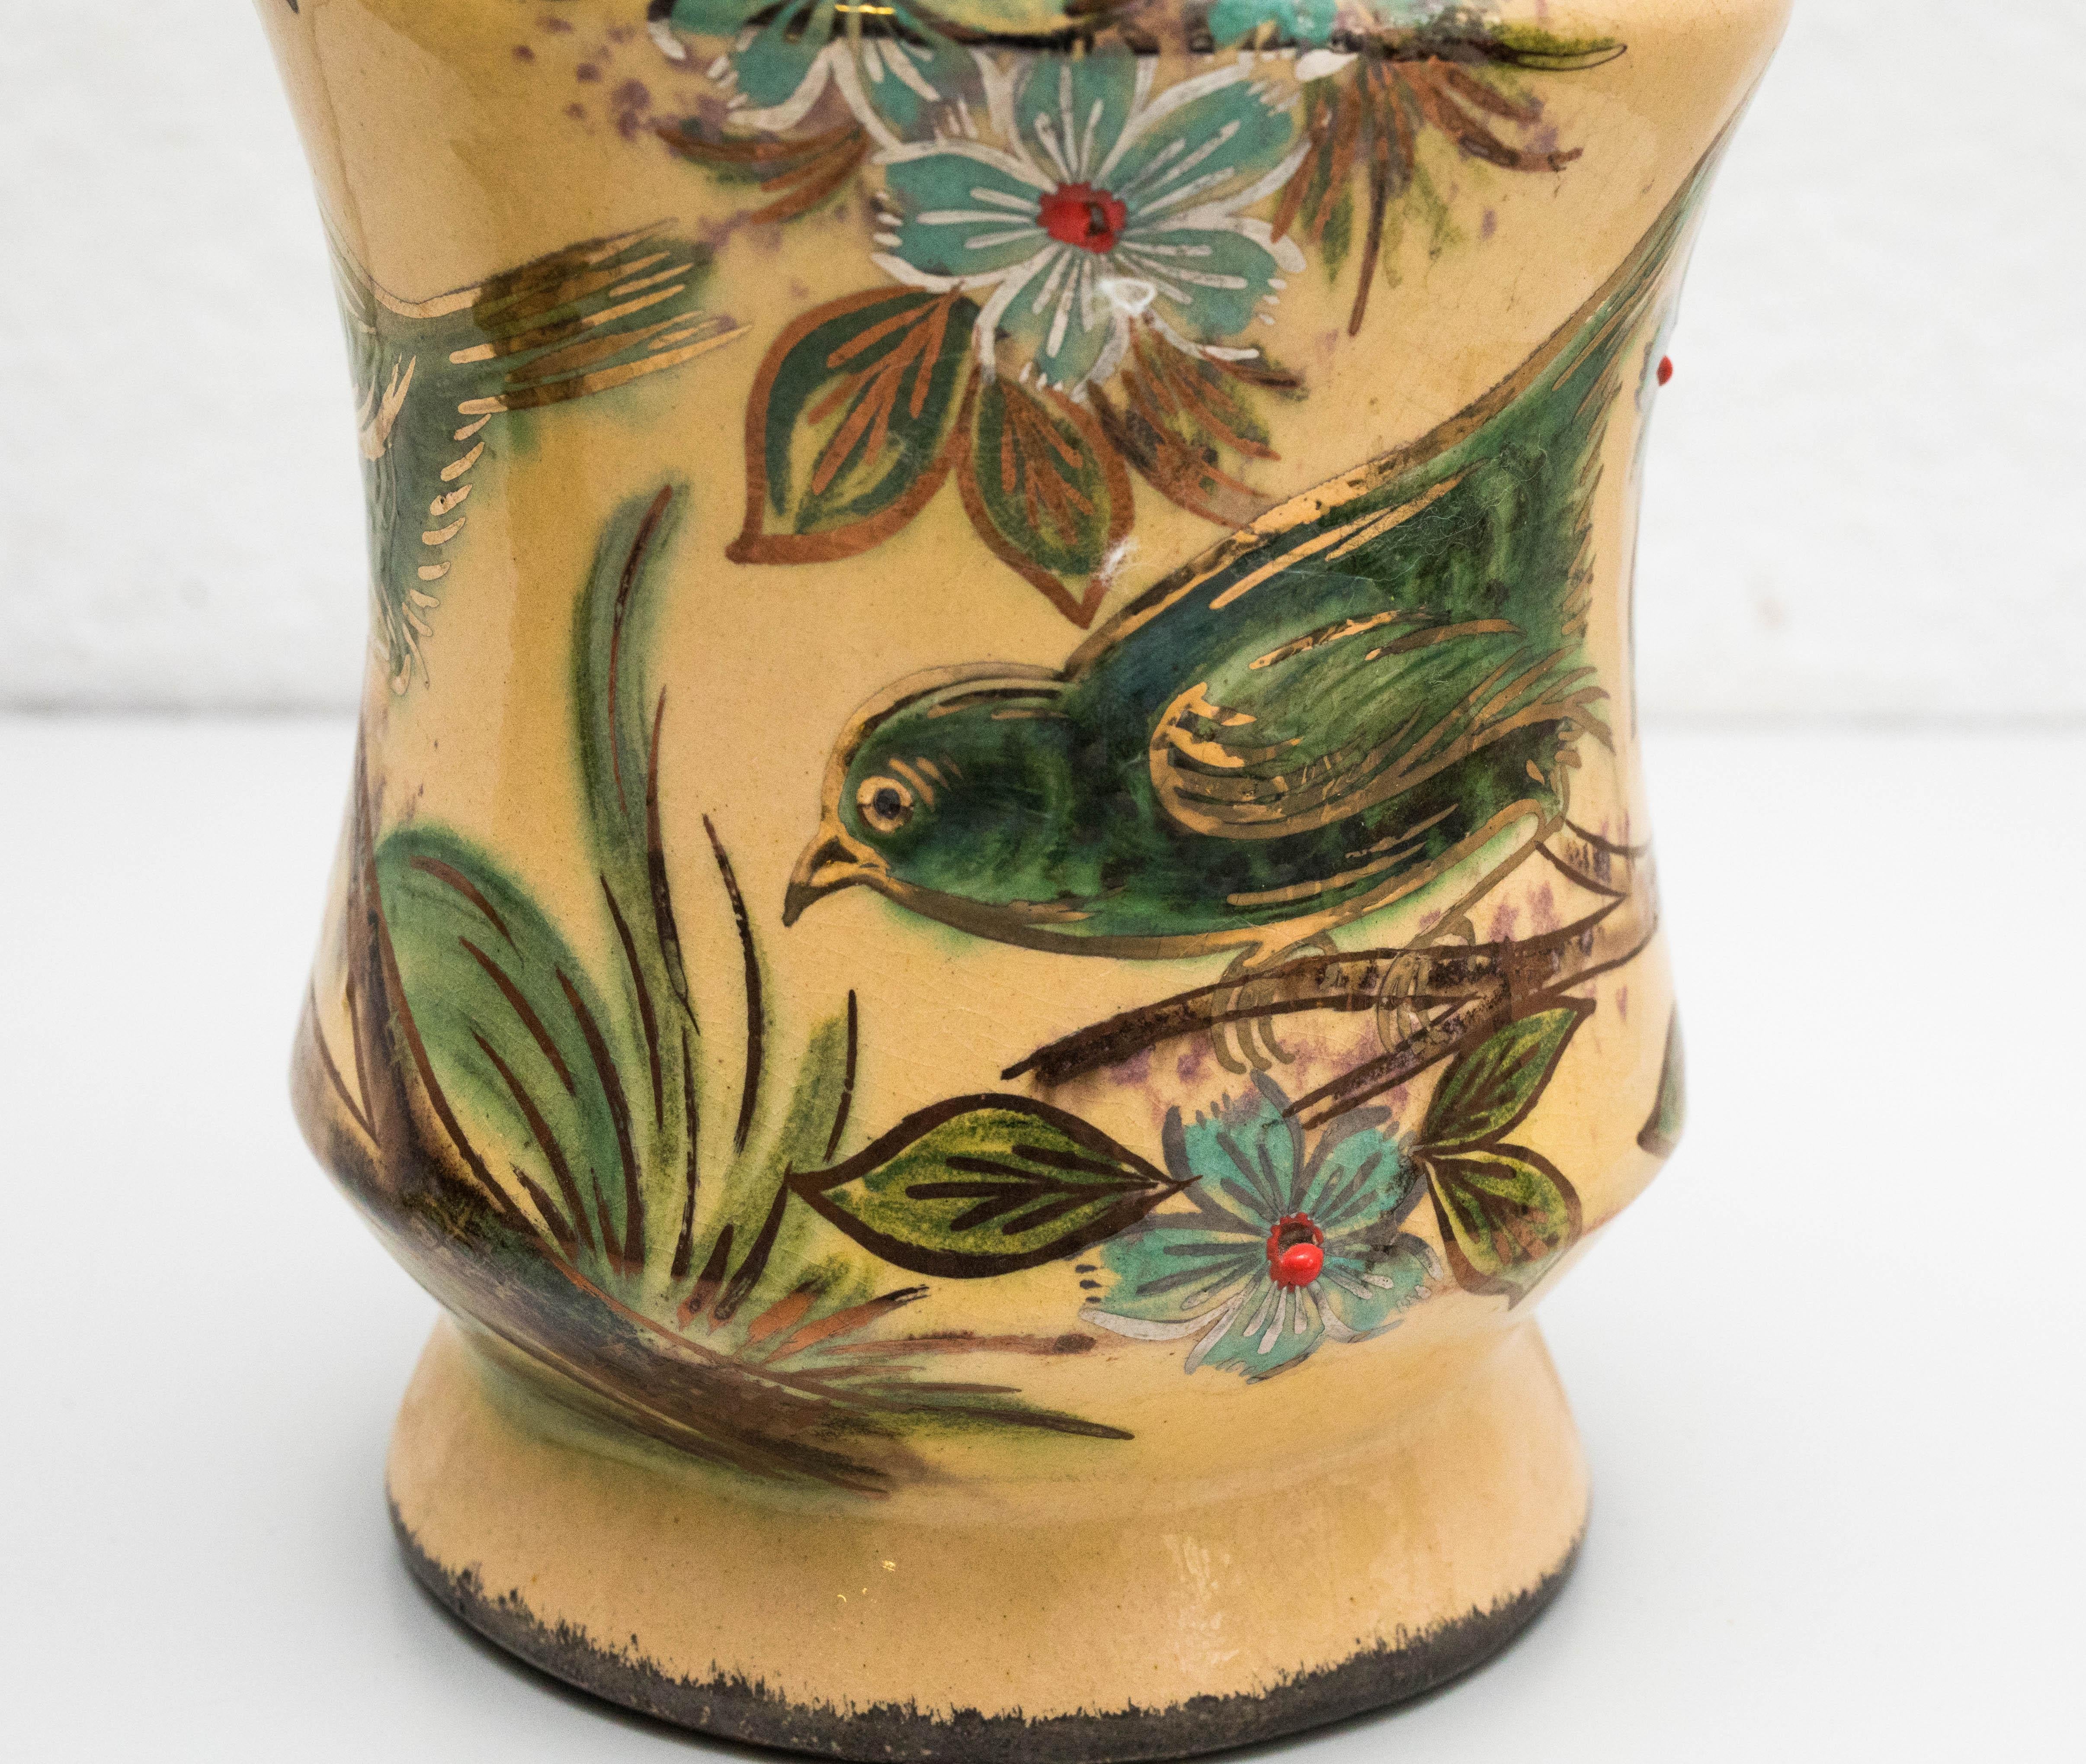 Set of Ceramic Hand Painted Vases by Catalan Artist Diaz Costa, circa 1960 For Sale 2